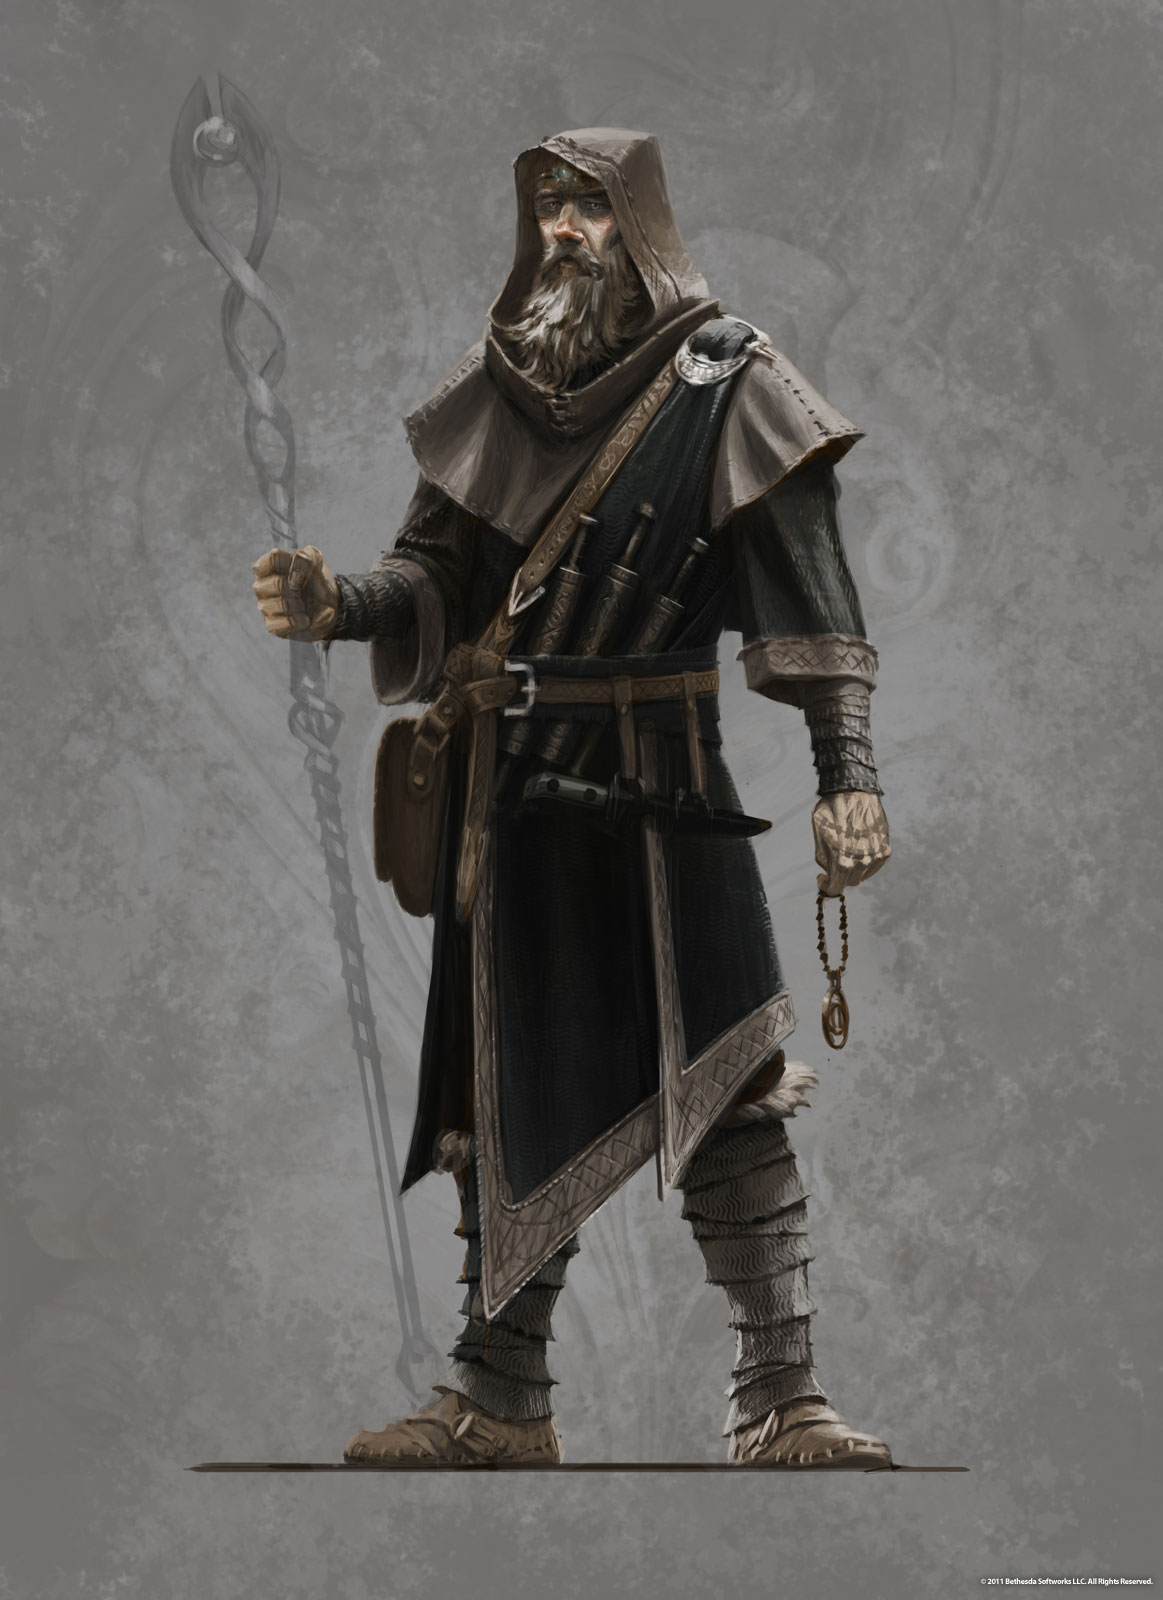 Why do Wizards have to wear a giant bathrobe? - Larian Studios forums